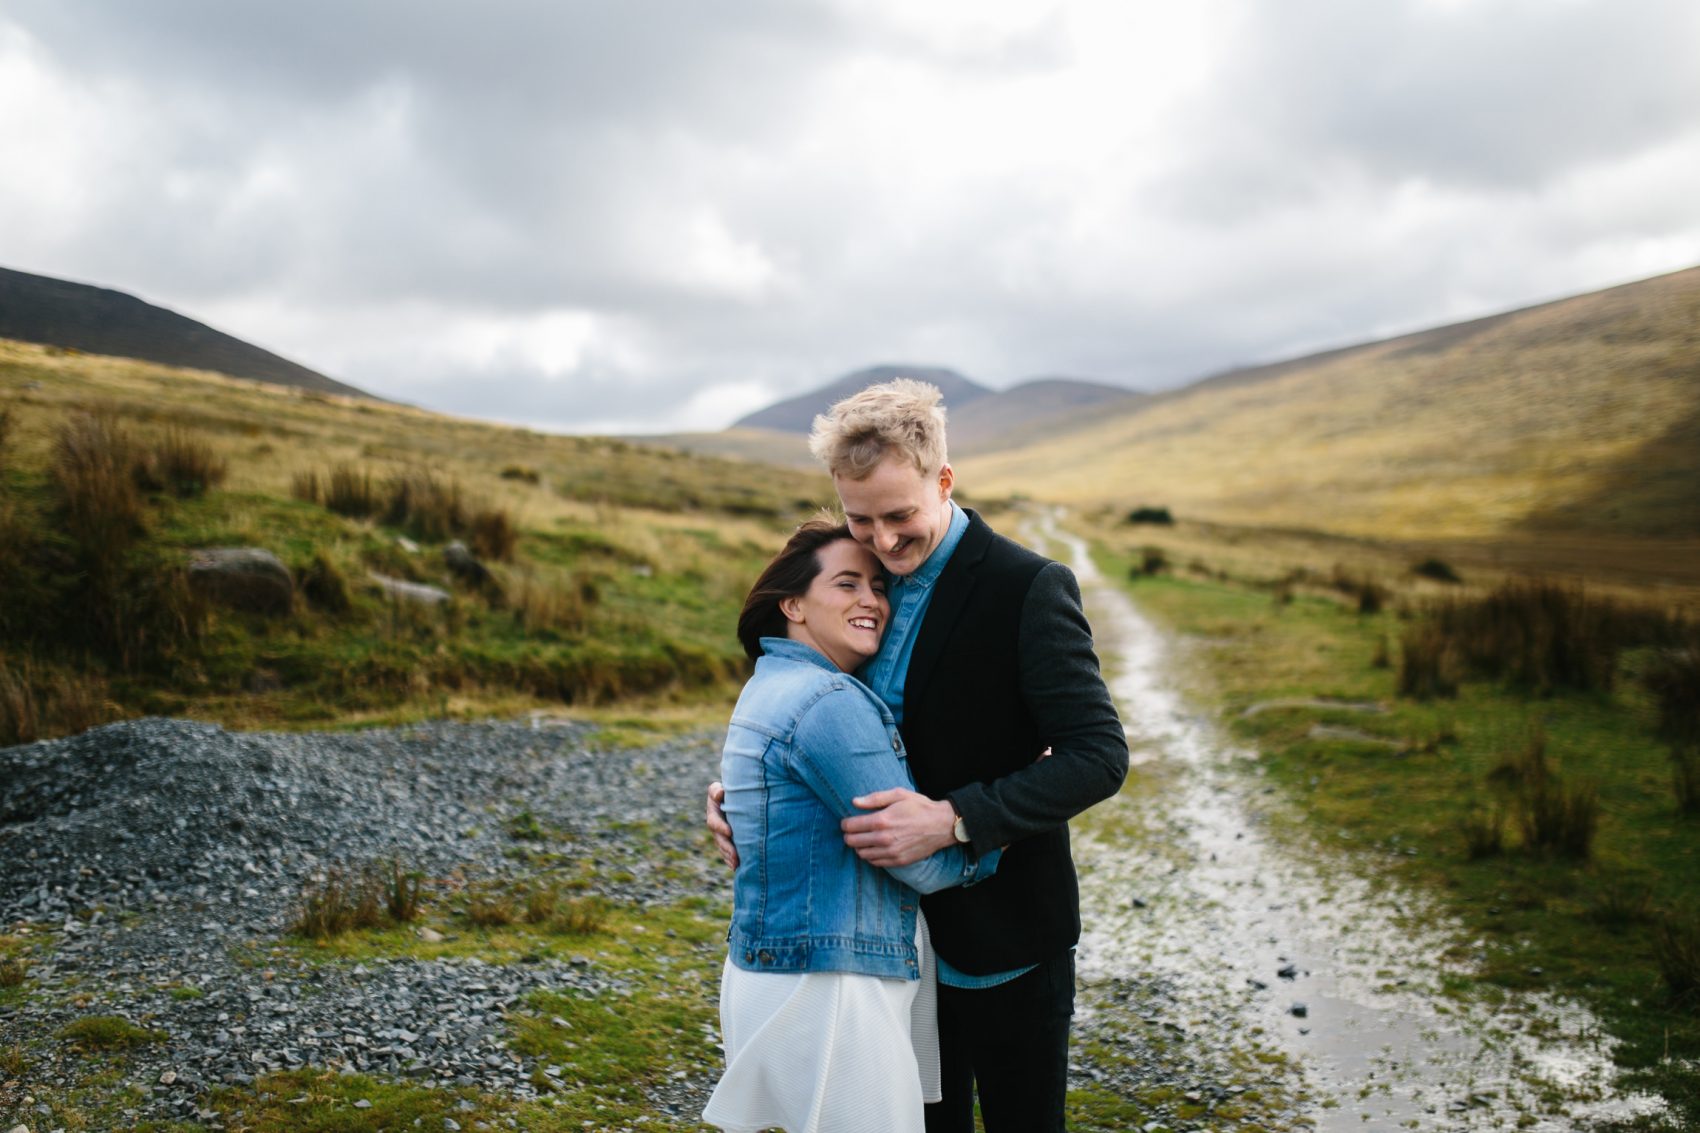 rk-web-98-1700x1133 Richard and Kate // Mourne Mountain Engagement Shoot